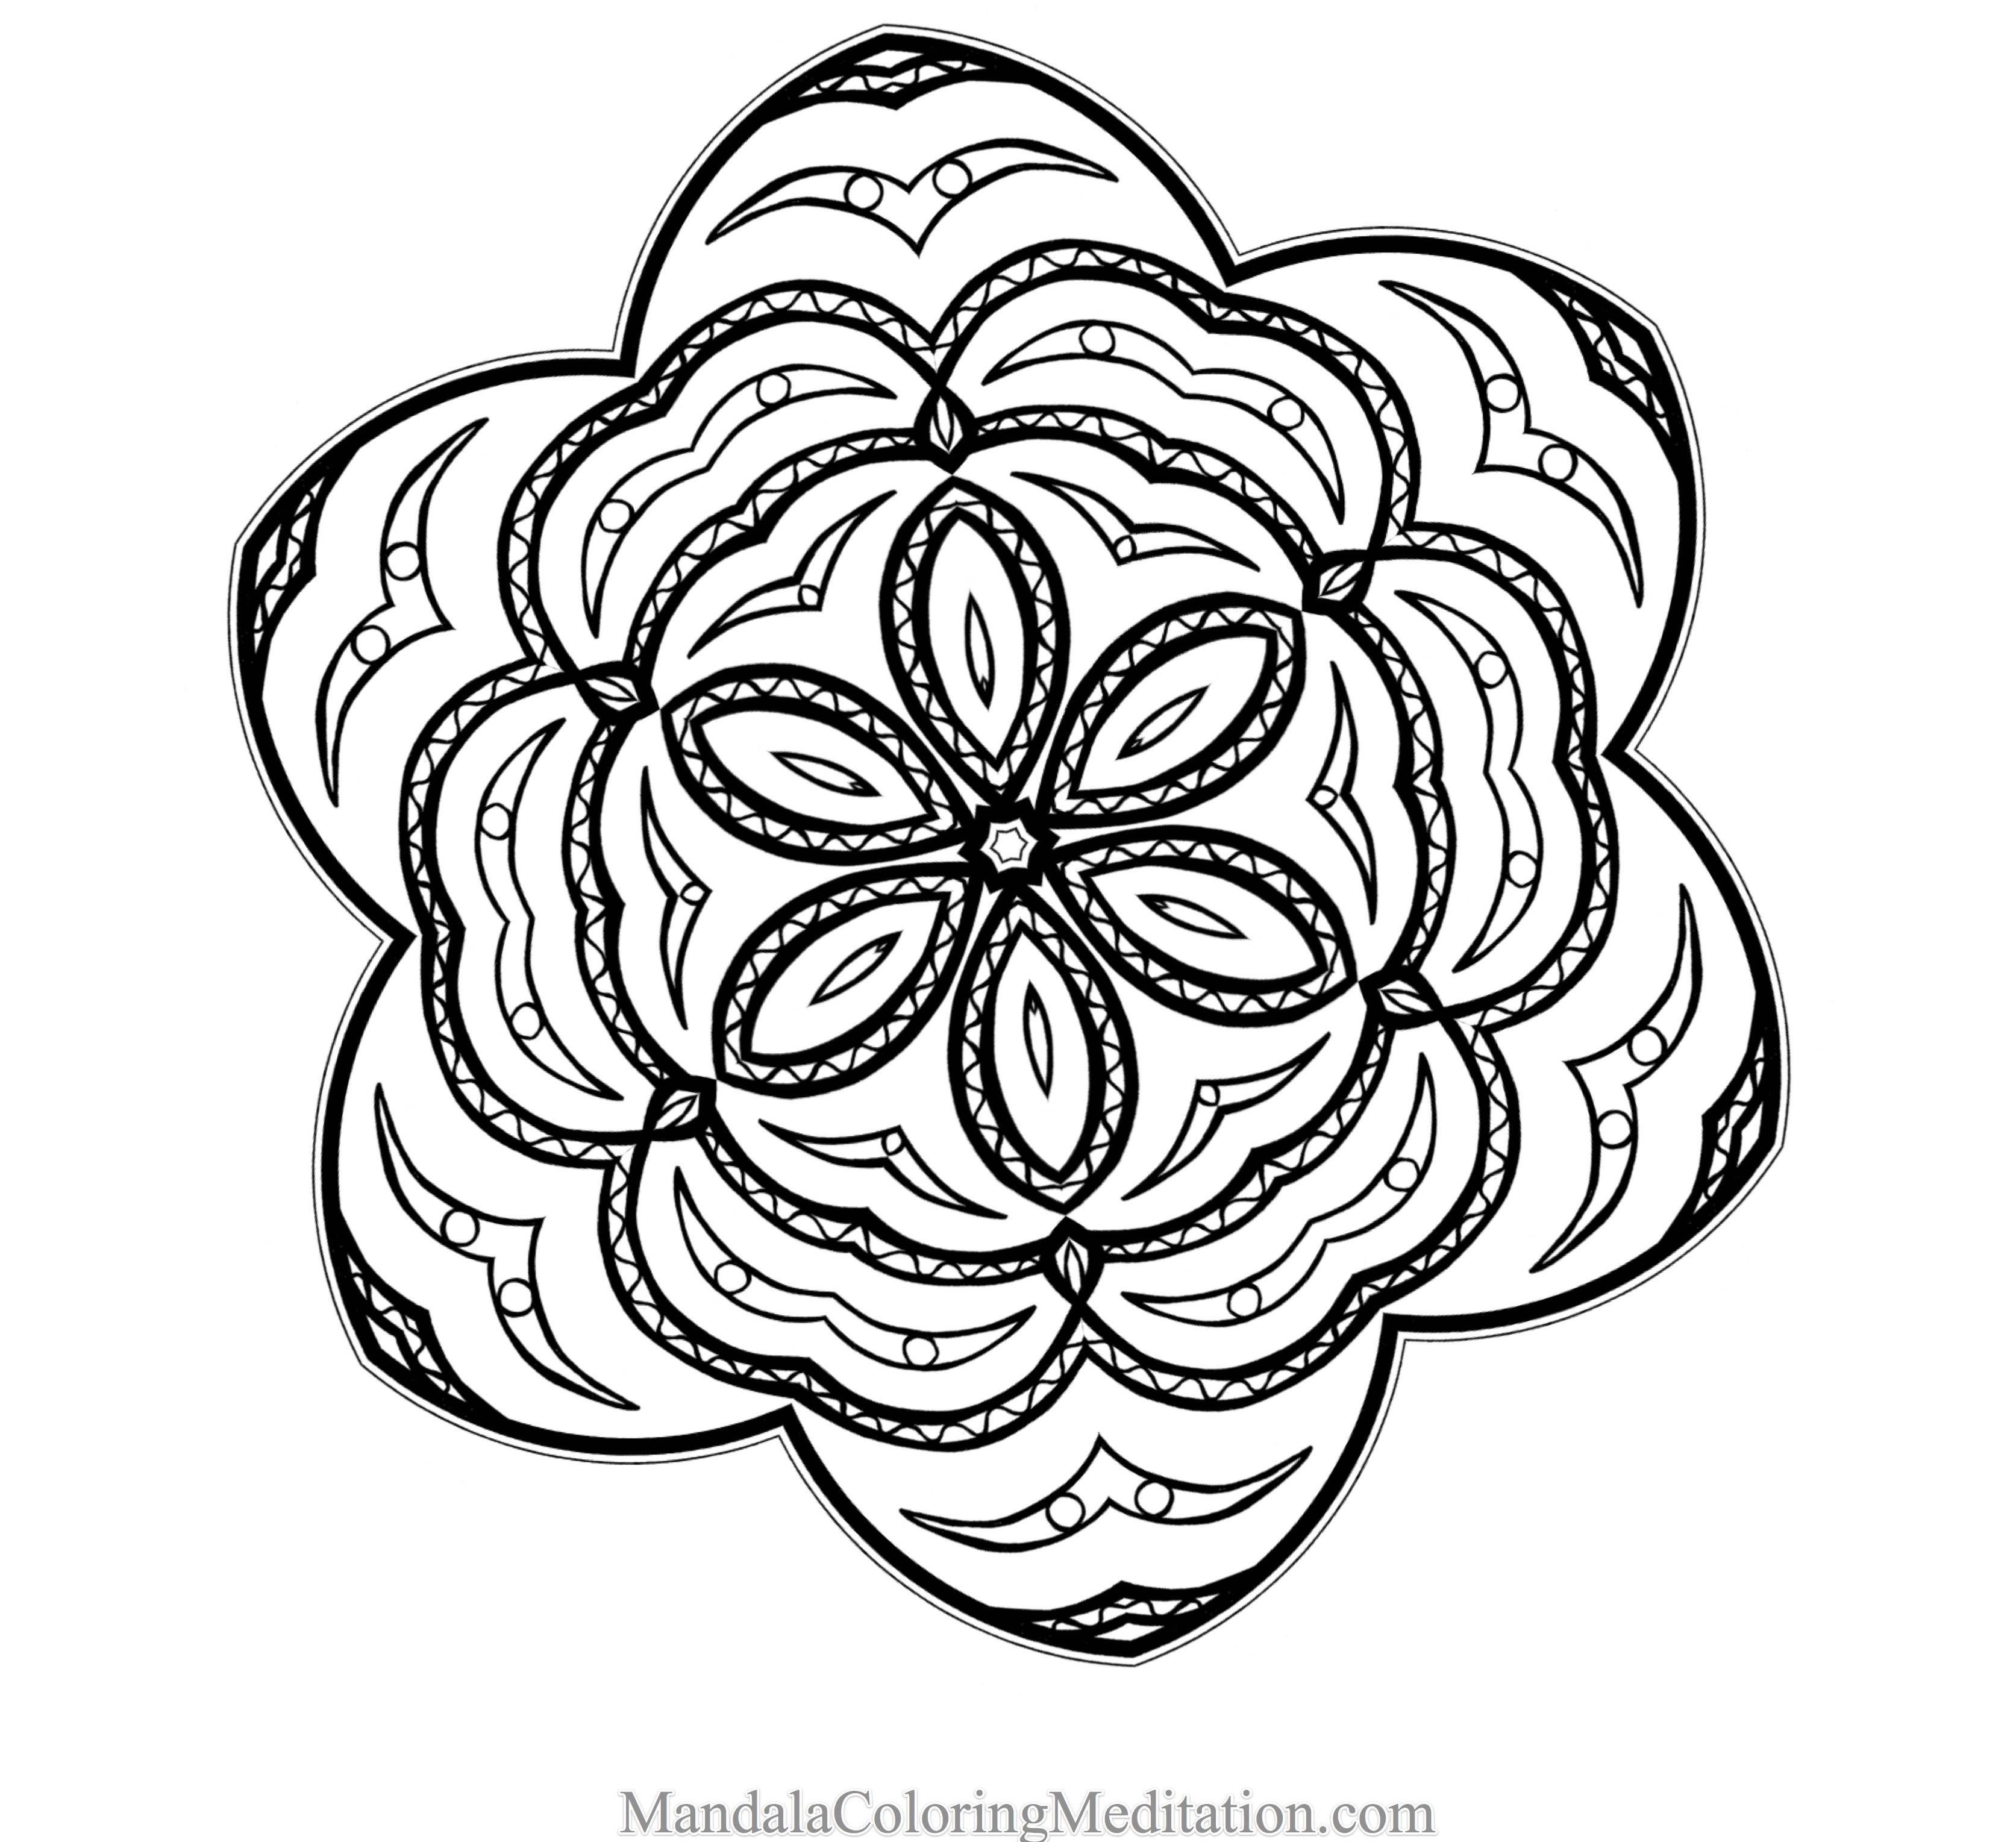  Free Coloring Pages For Adults – letscoloringpages.com – Adult